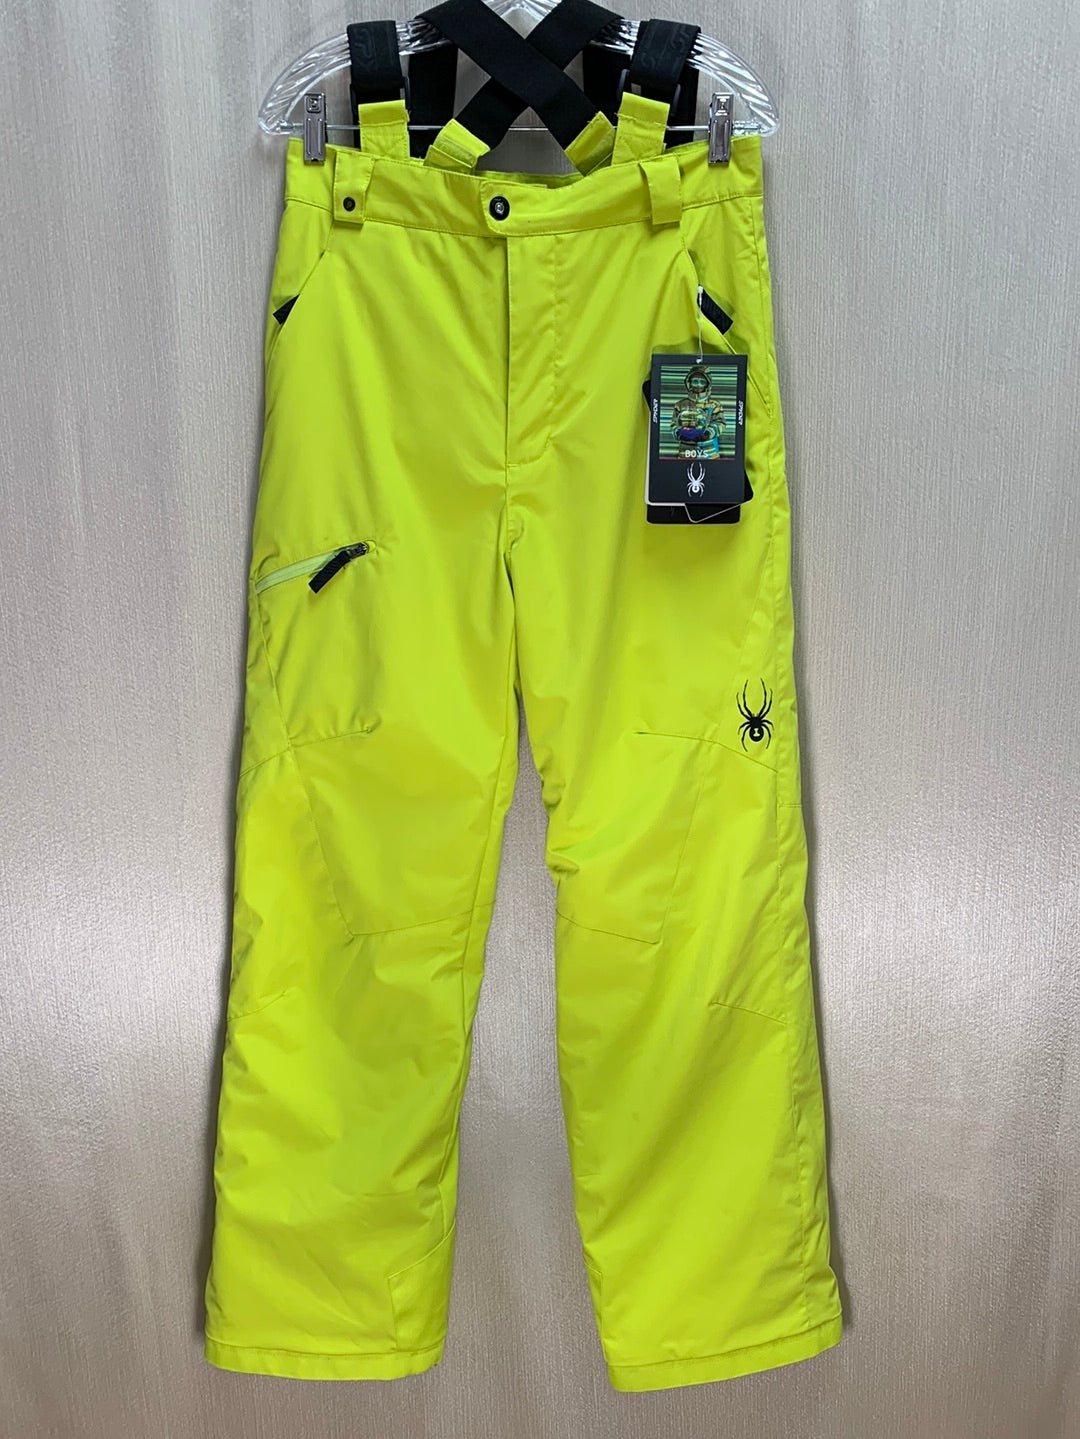 Spyder Section Ski Pants - Insulated